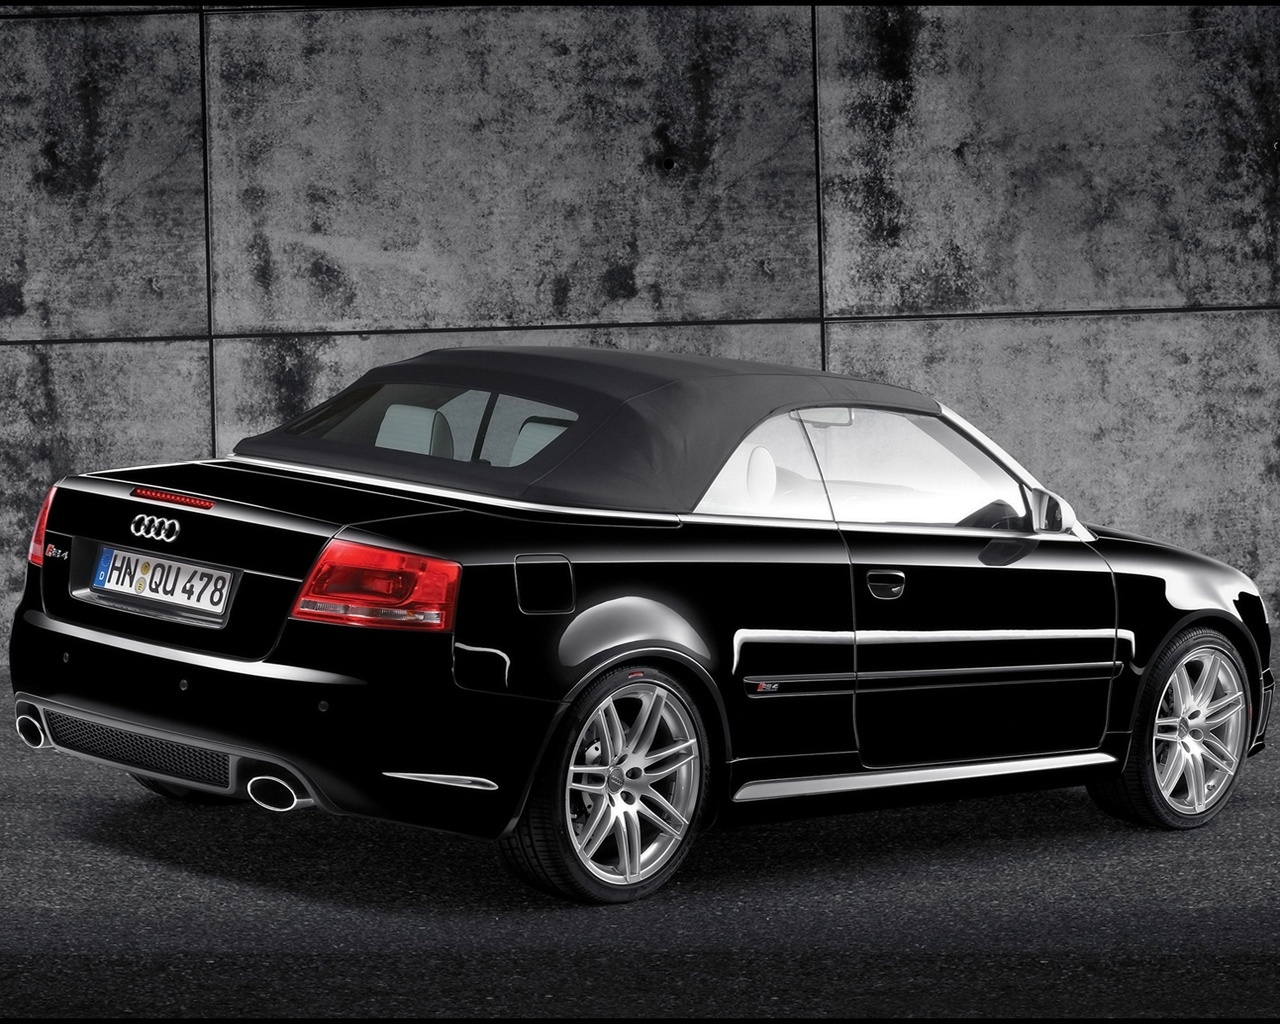 Audi RS 4 Cabriolet Black Rear And Side 2008 for 1280 x 1024 resolution